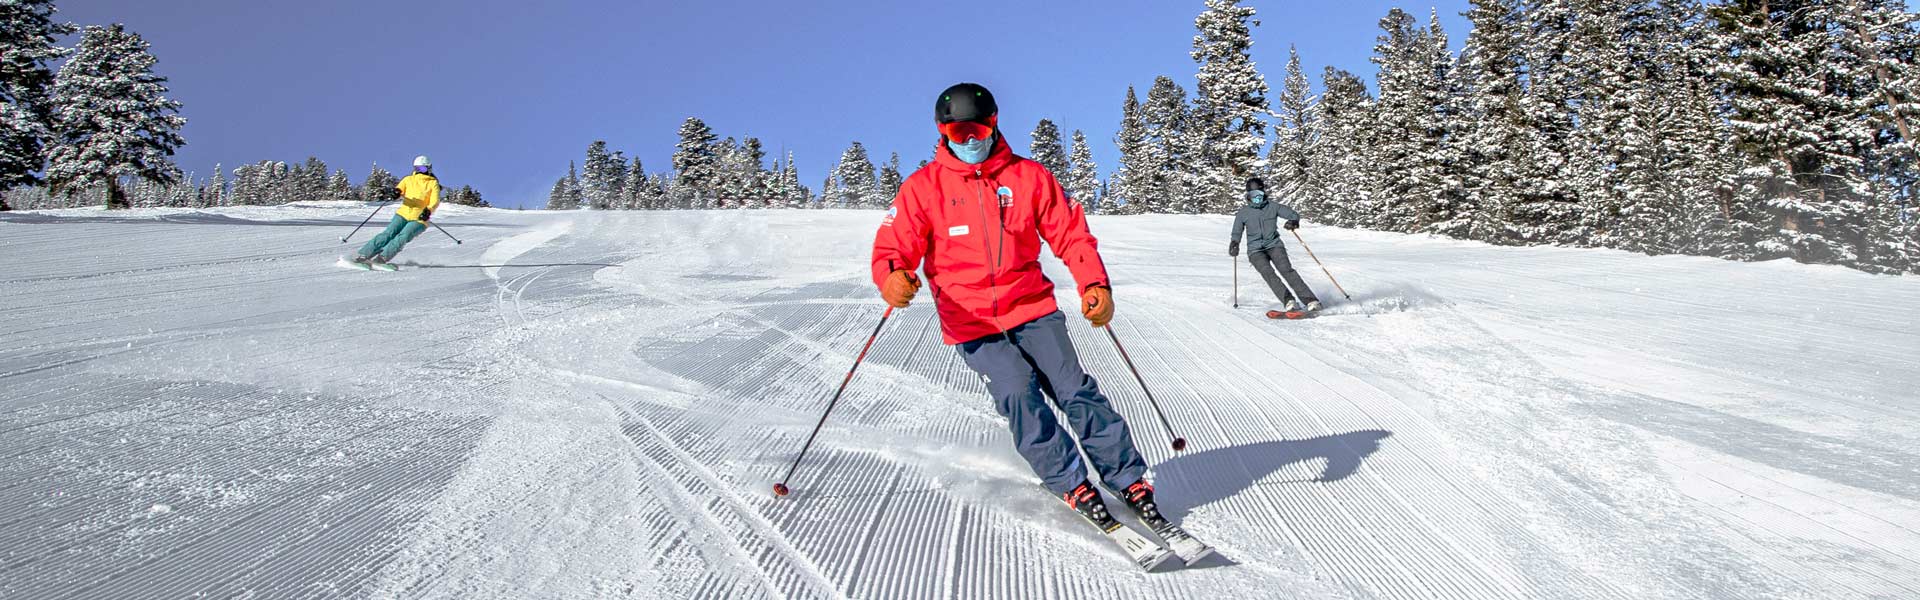 Instructor skiing a groomed runs with two skiers following them